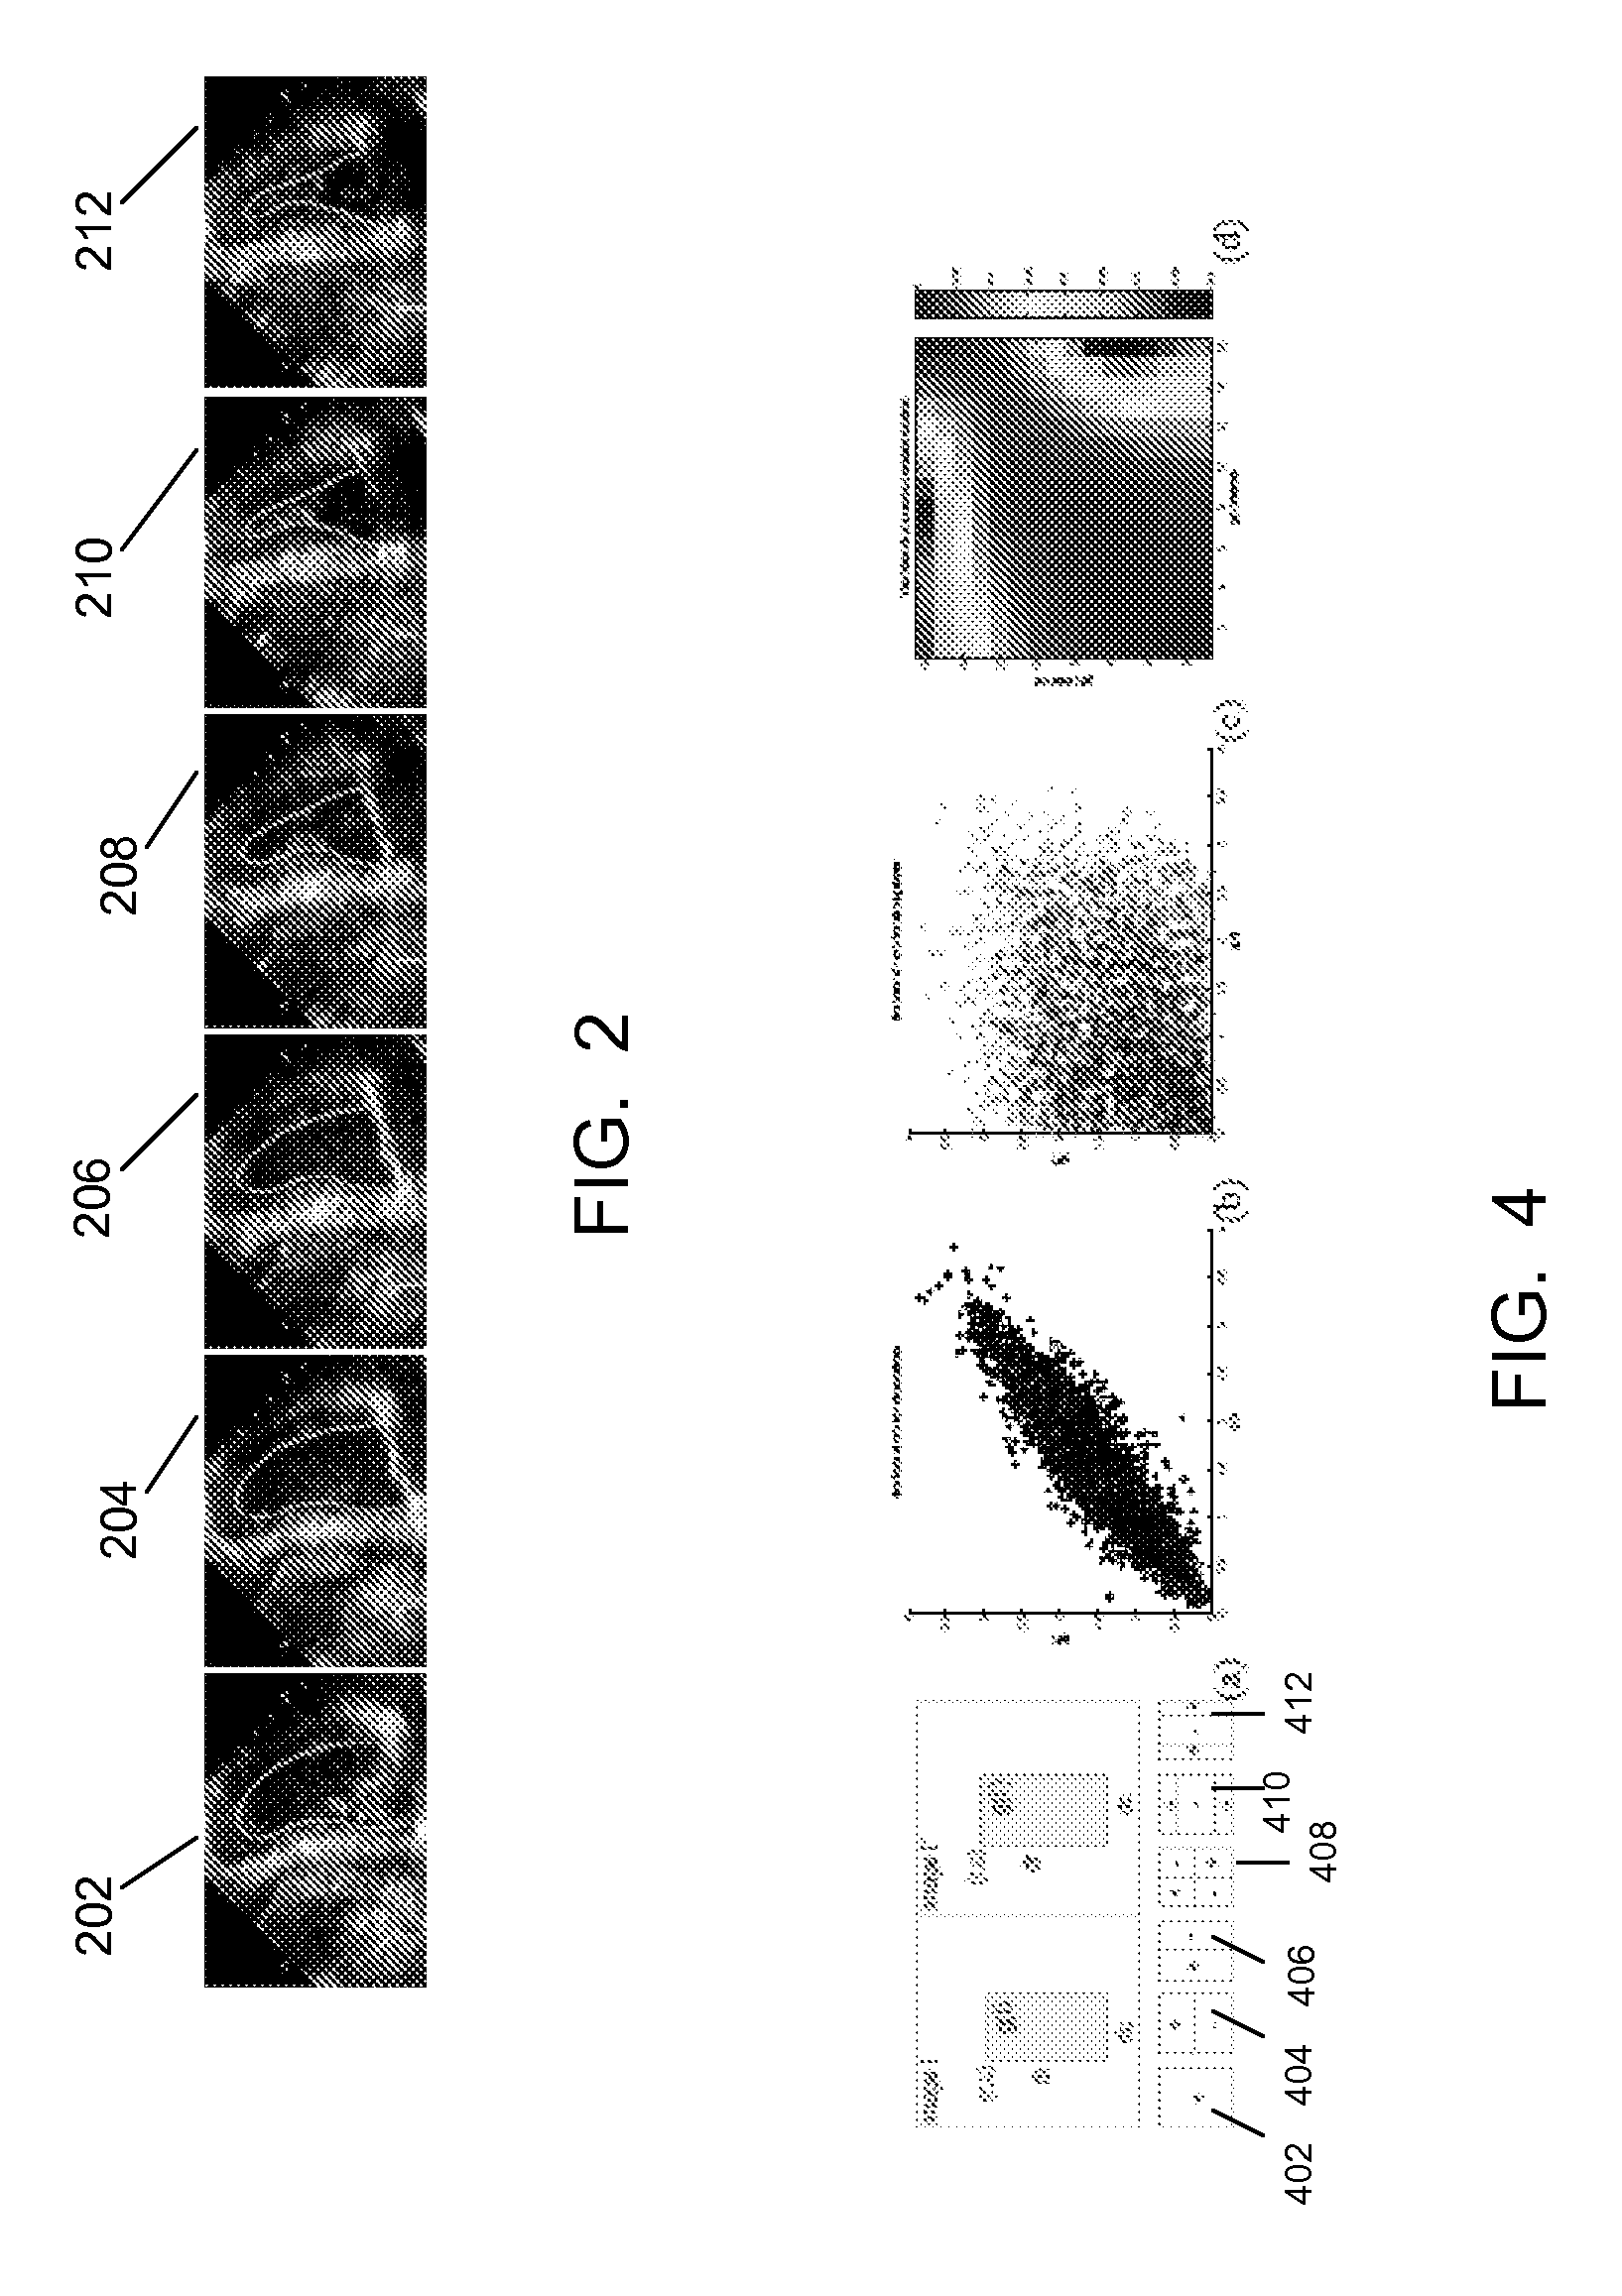 System and method for using a similarity function to perform appearance matching in image pairs